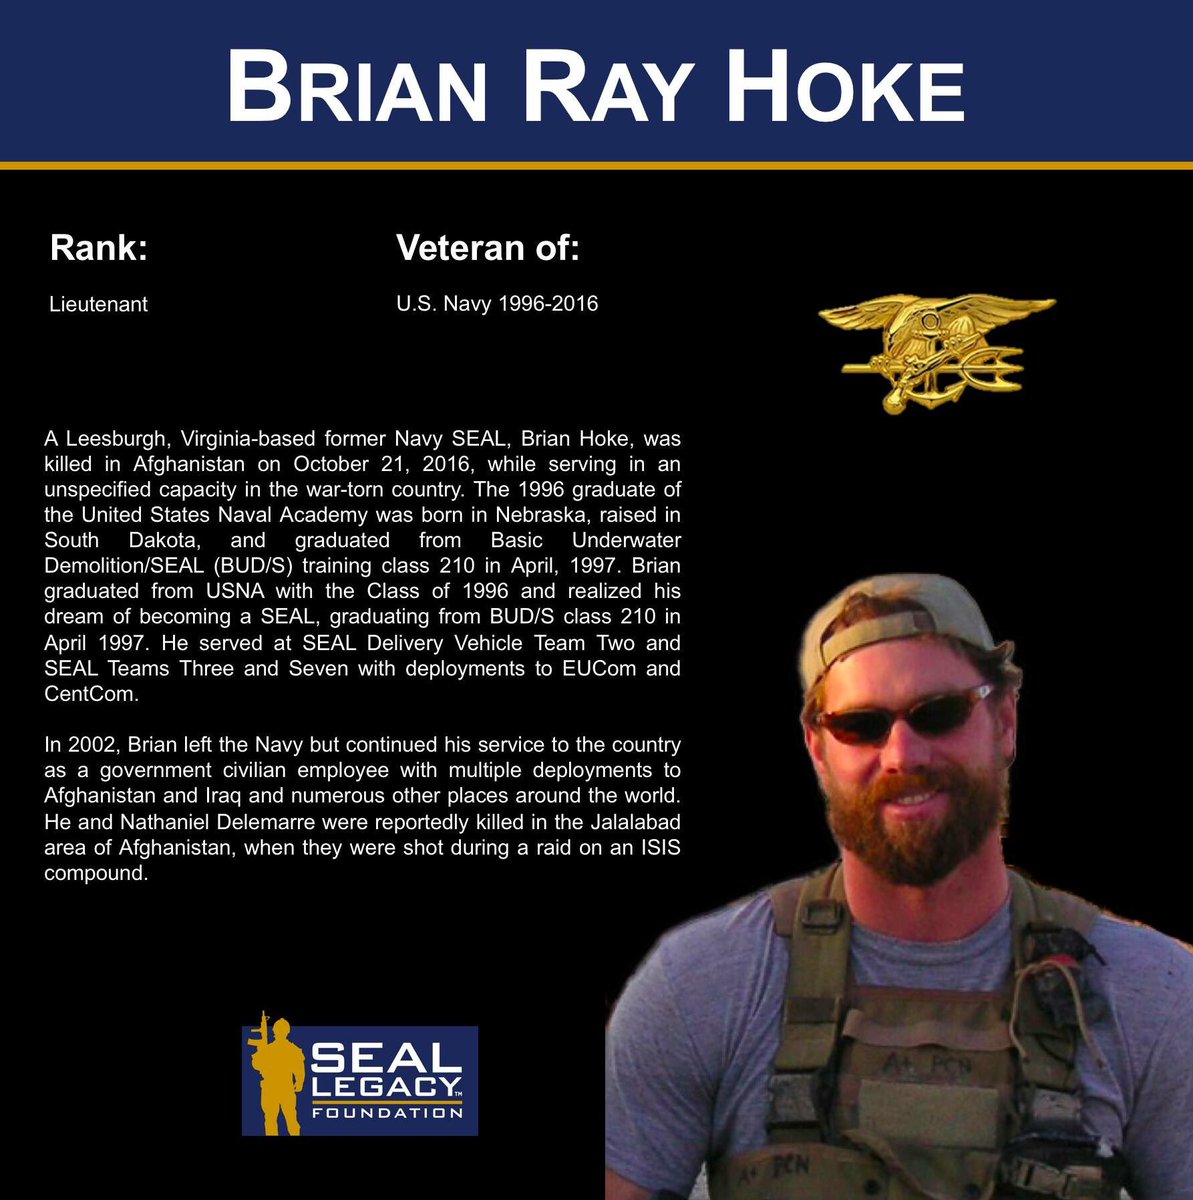 Another friend & mentor of mine is Brian Hoke a former SEAL who was killed in AFG taking the fight to ISIS. Brian was friend to all & true warrior.  https://www.standforsomething.com/blogs/those-who-stood/brian-ray-hoke